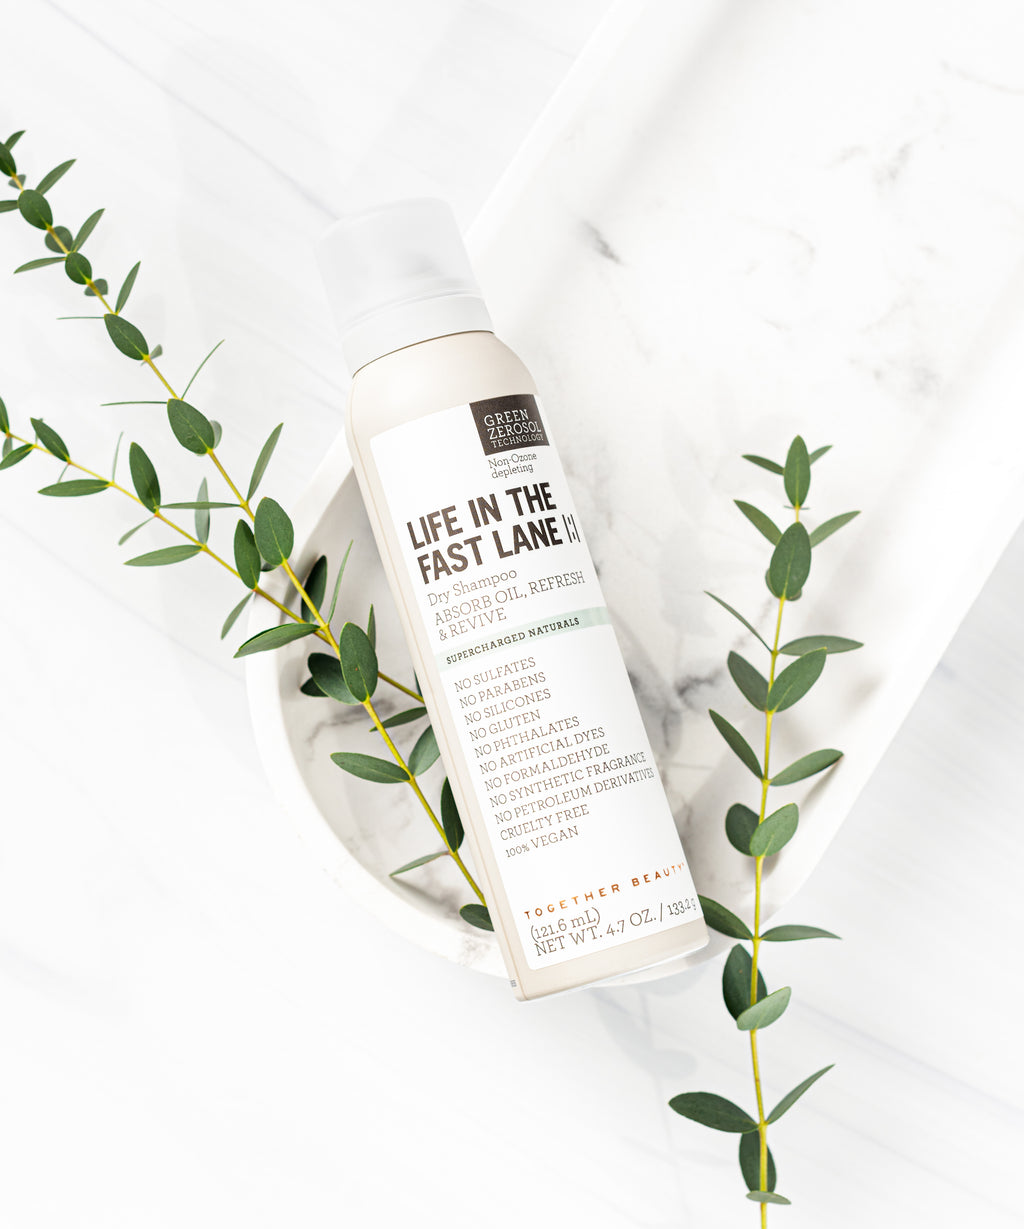 Life in the Fast Lane clean dry shampoo